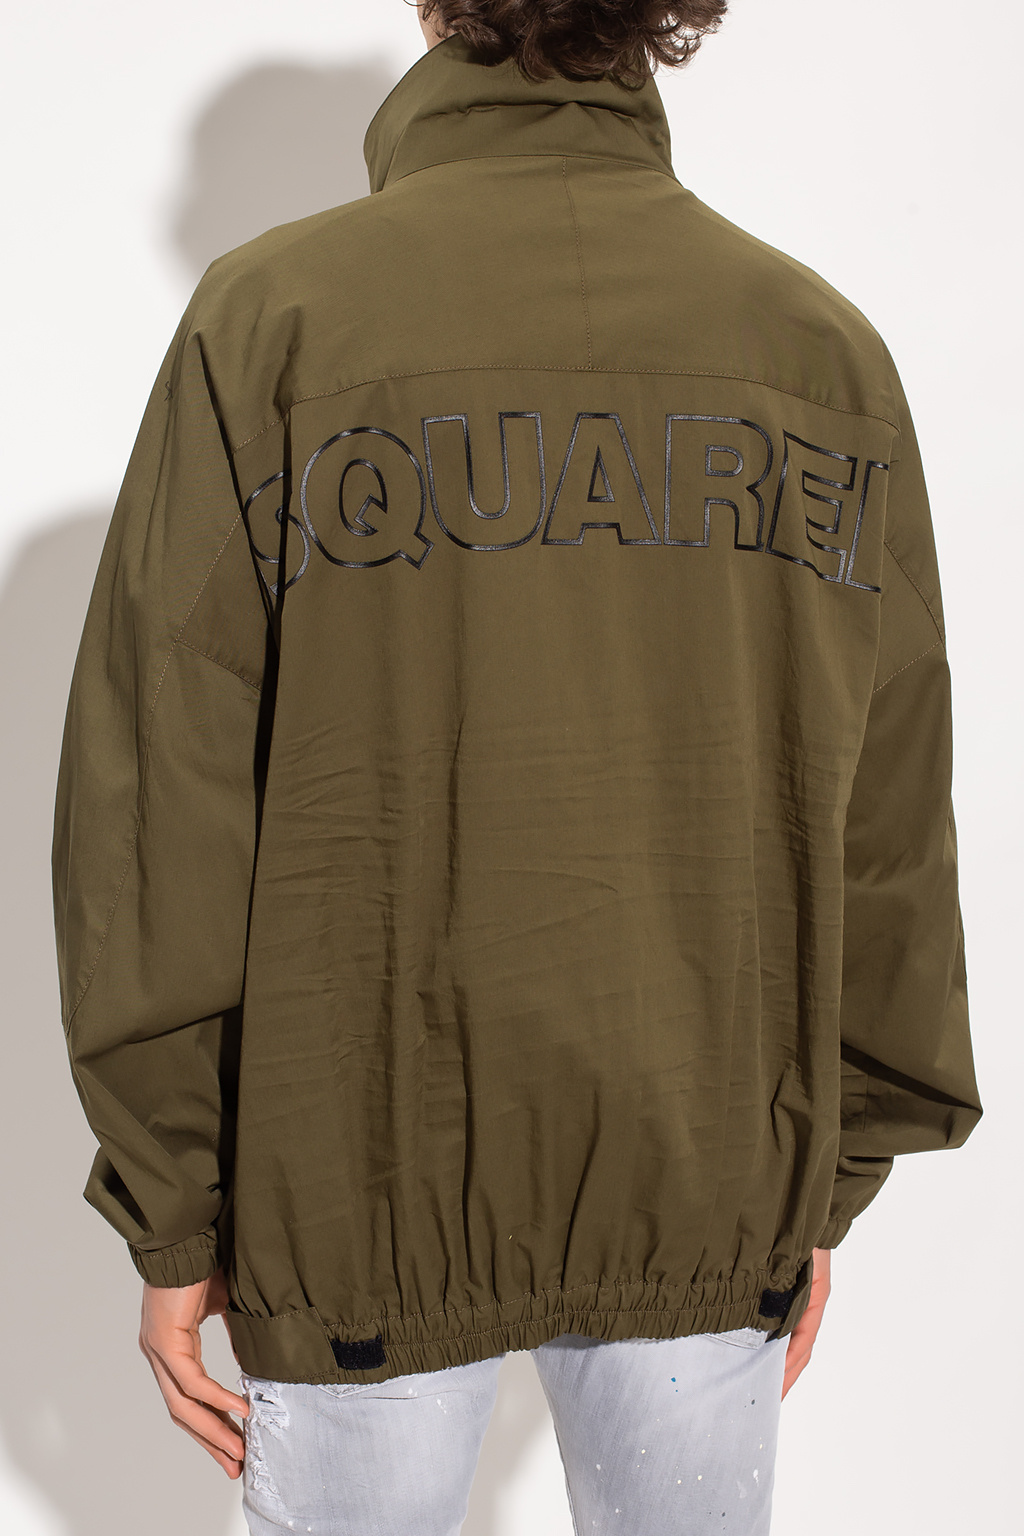 Dsquared2 embroidered logo pullover